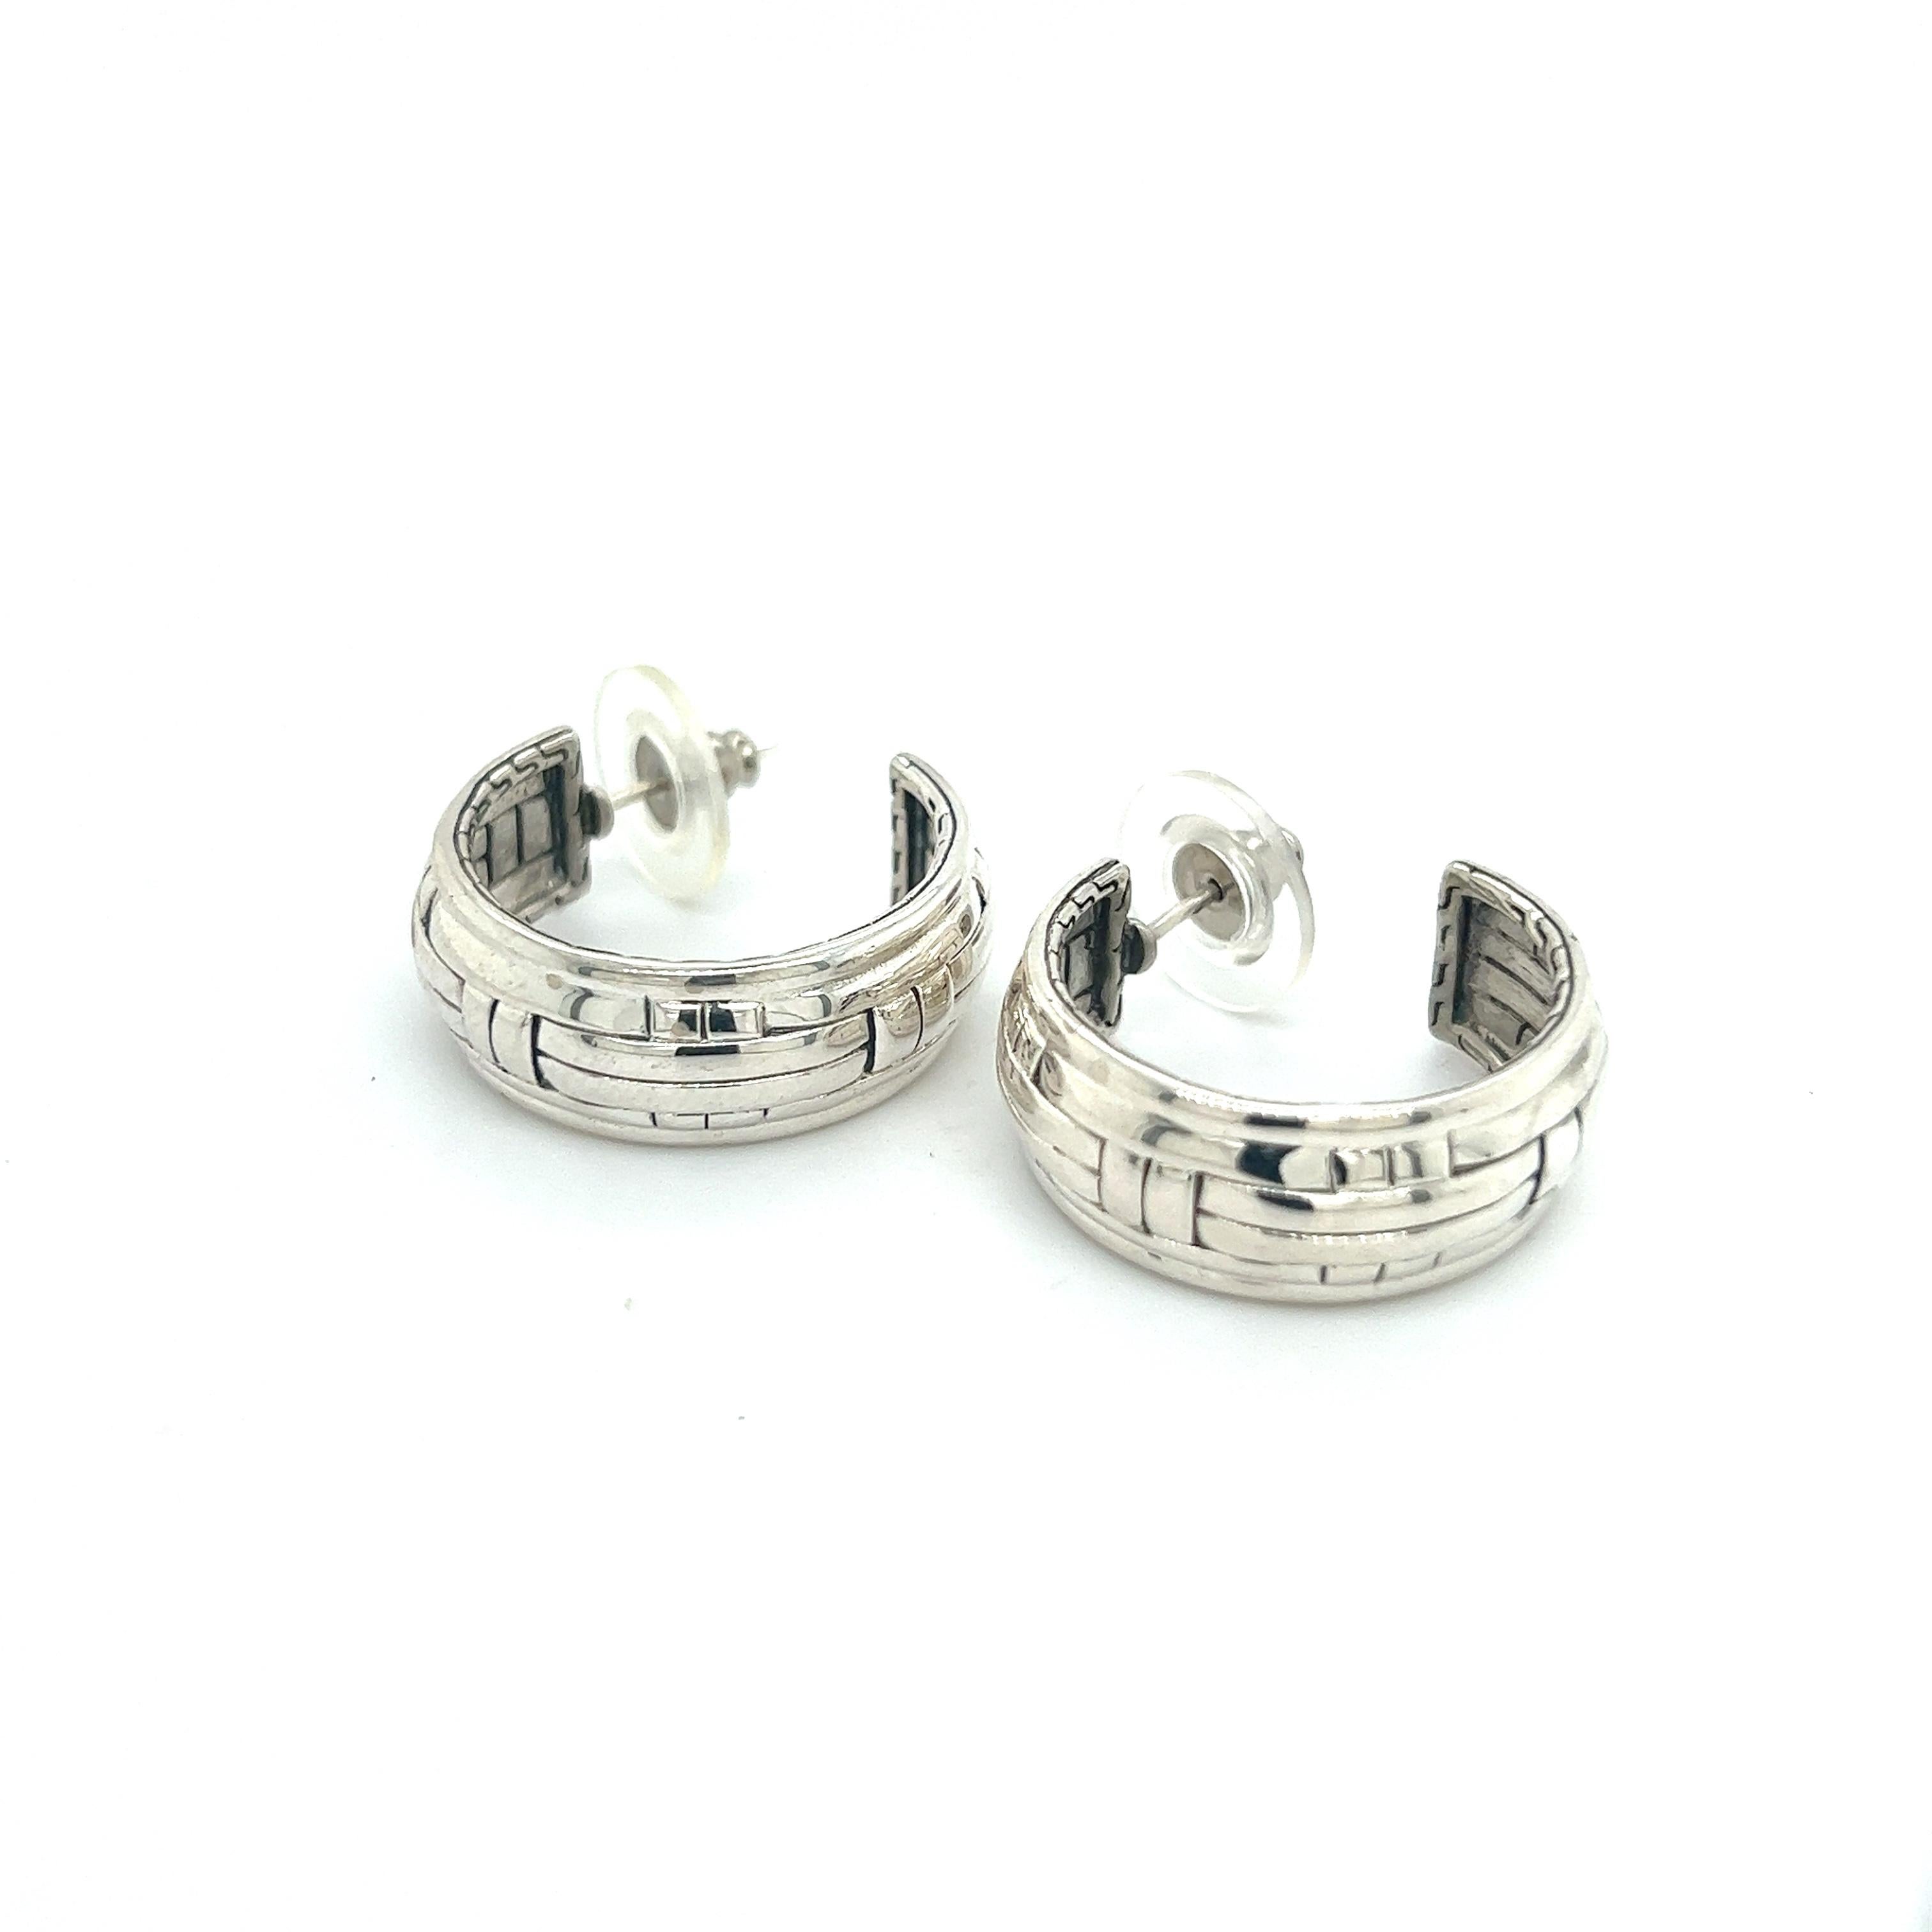 Authentic John Hardy Estate Ladies Hoop Earrings Silver JH53

TRUSTED SELLER SINCE 2002

PLEASE SEE OUR HUNDREDS OF POSITIVE FEEDBACKS FROM OUR CLIENTS!!

FREE SHIPPING!!

DETAILS
Style: Hoop Earrings
Hoop: 1 inch
Weight: 14 Grams
Metal: Sterling